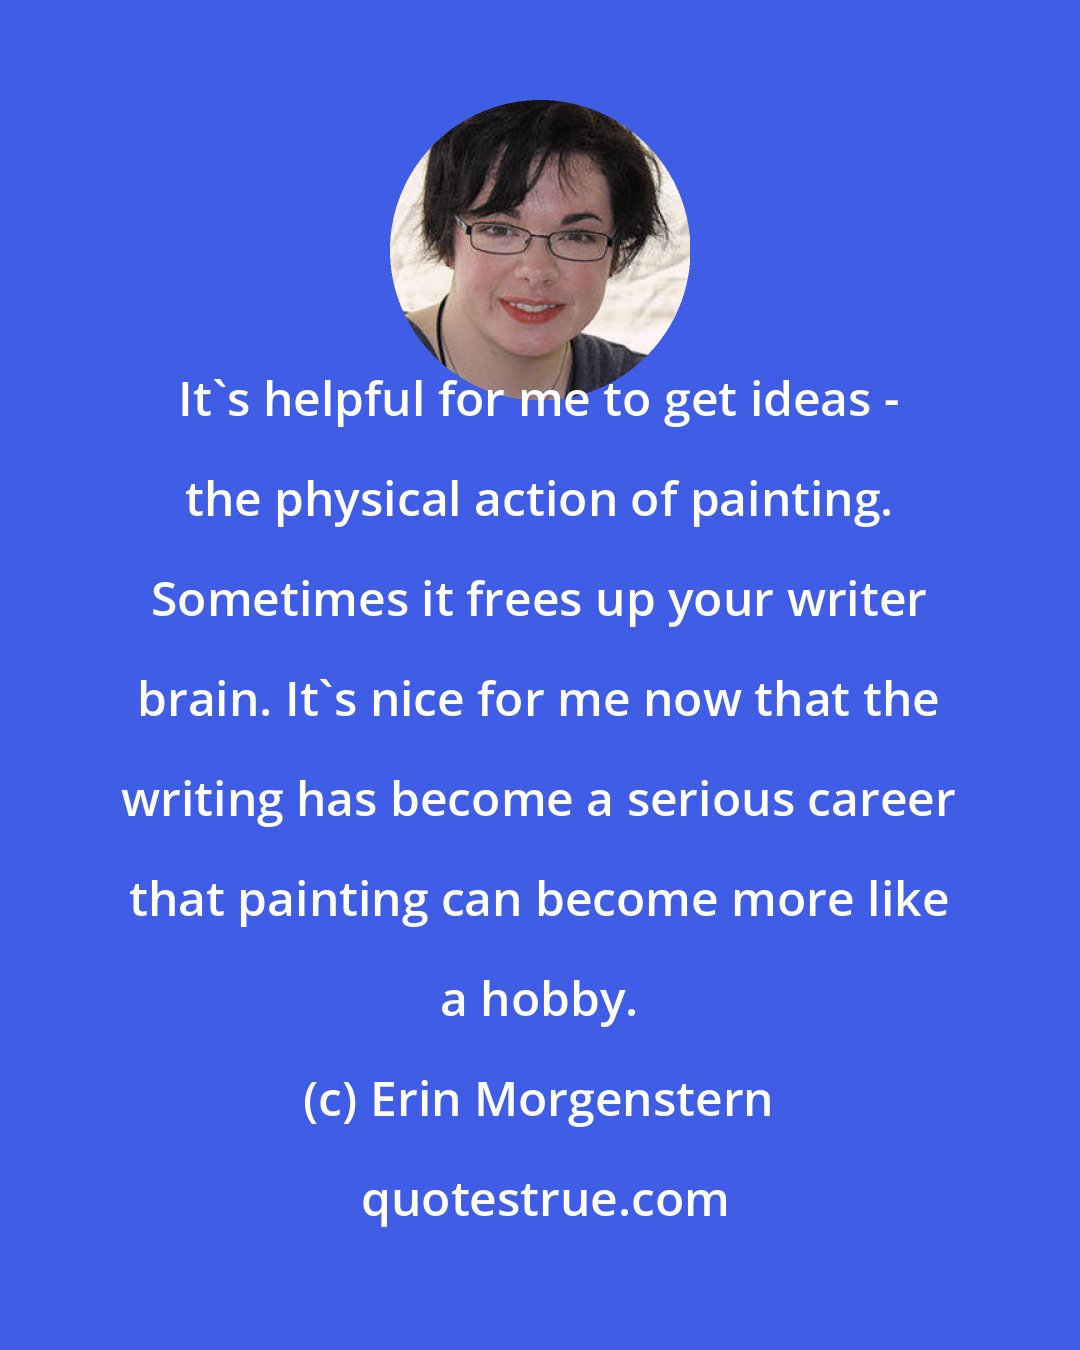 Erin Morgenstern: It's helpful for me to get ideas - the physical action of painting. Sometimes it frees up your writer brain. It's nice for me now that the writing has become a serious career that painting can become more like a hobby.